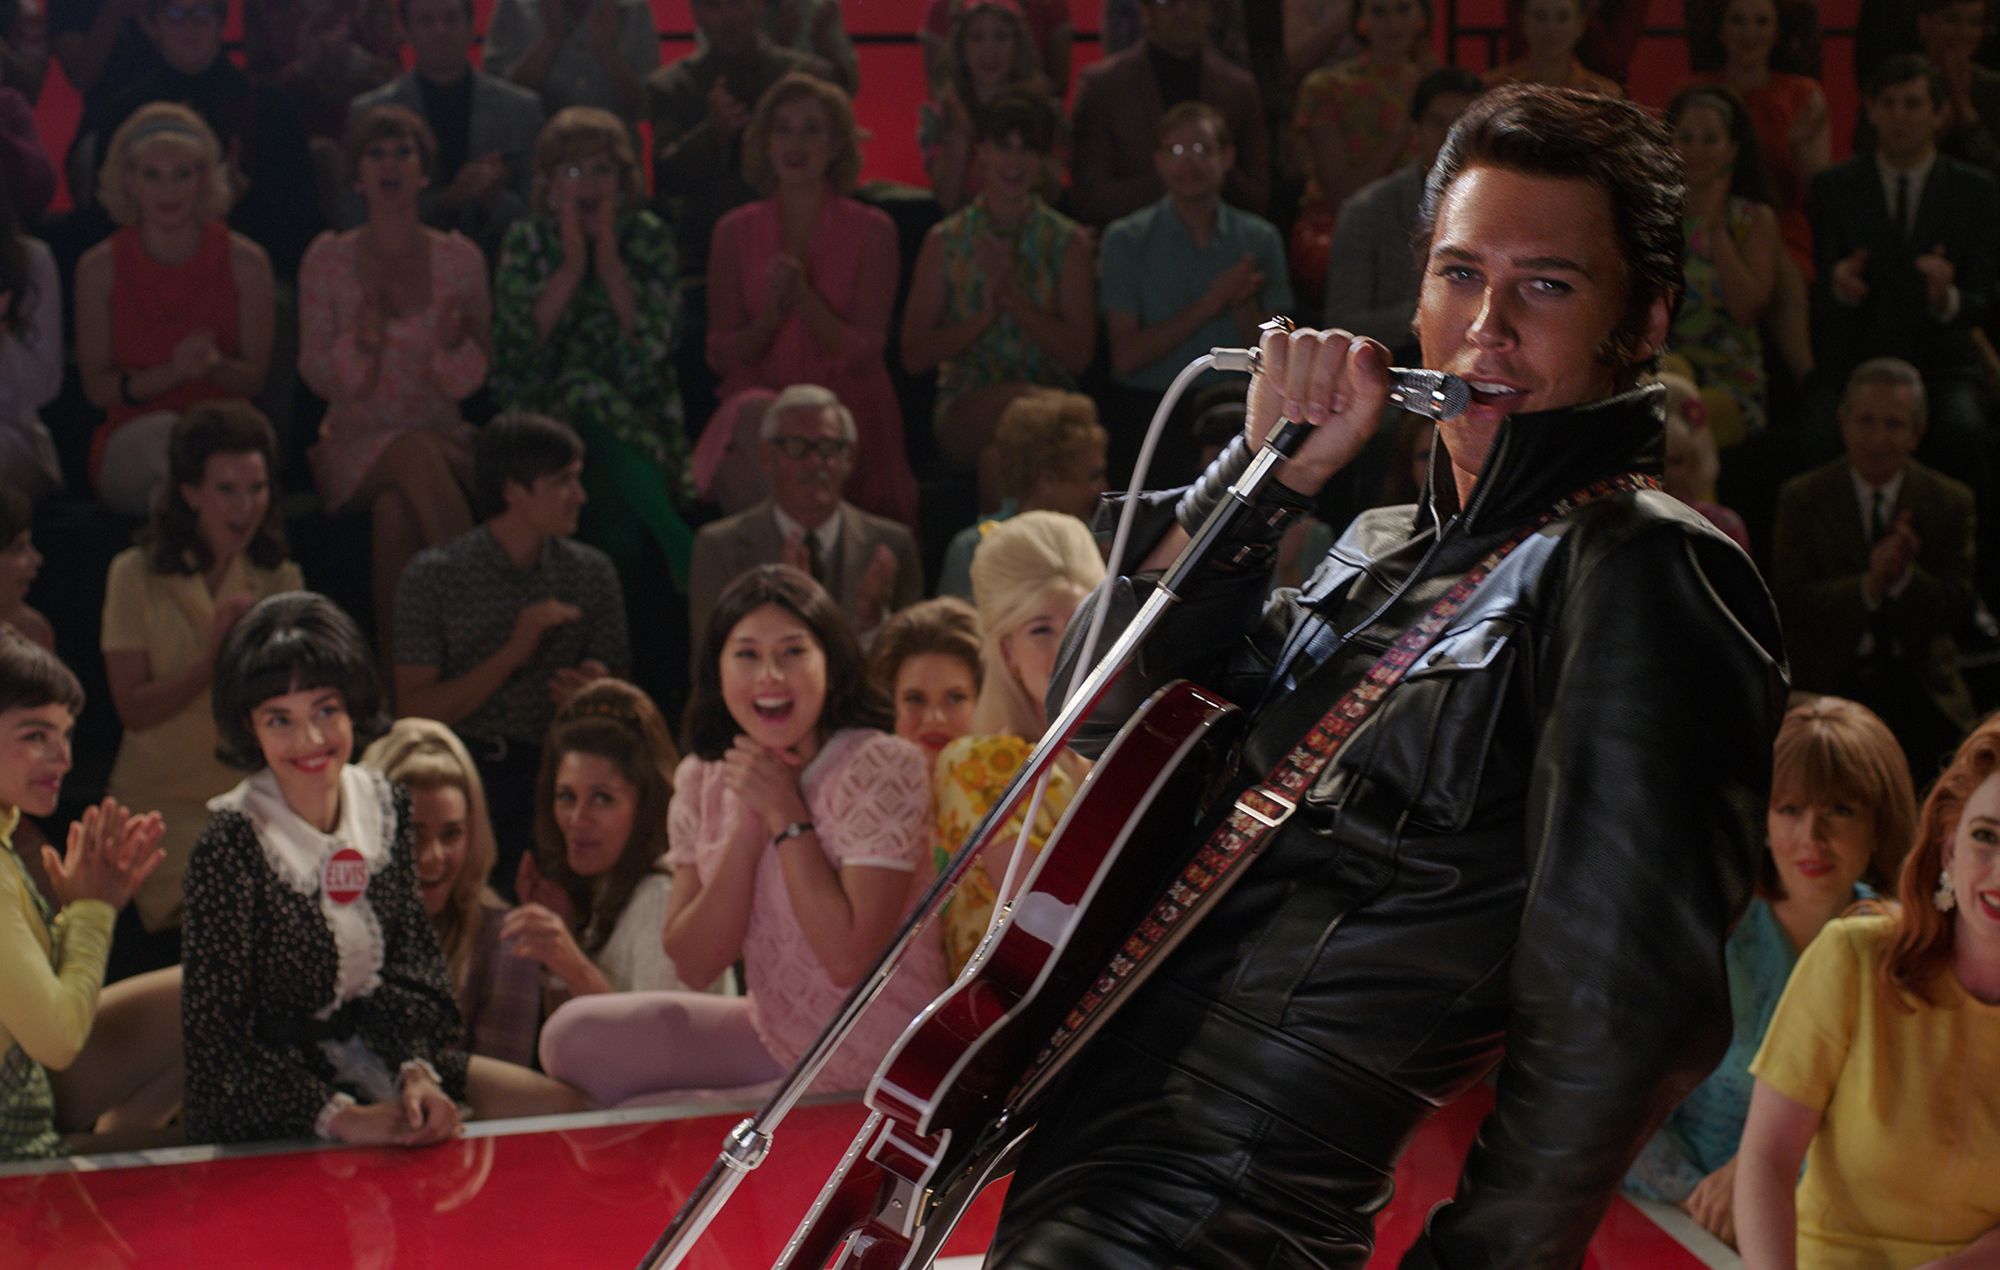 Austin as Elvis performing for an enraptured audience